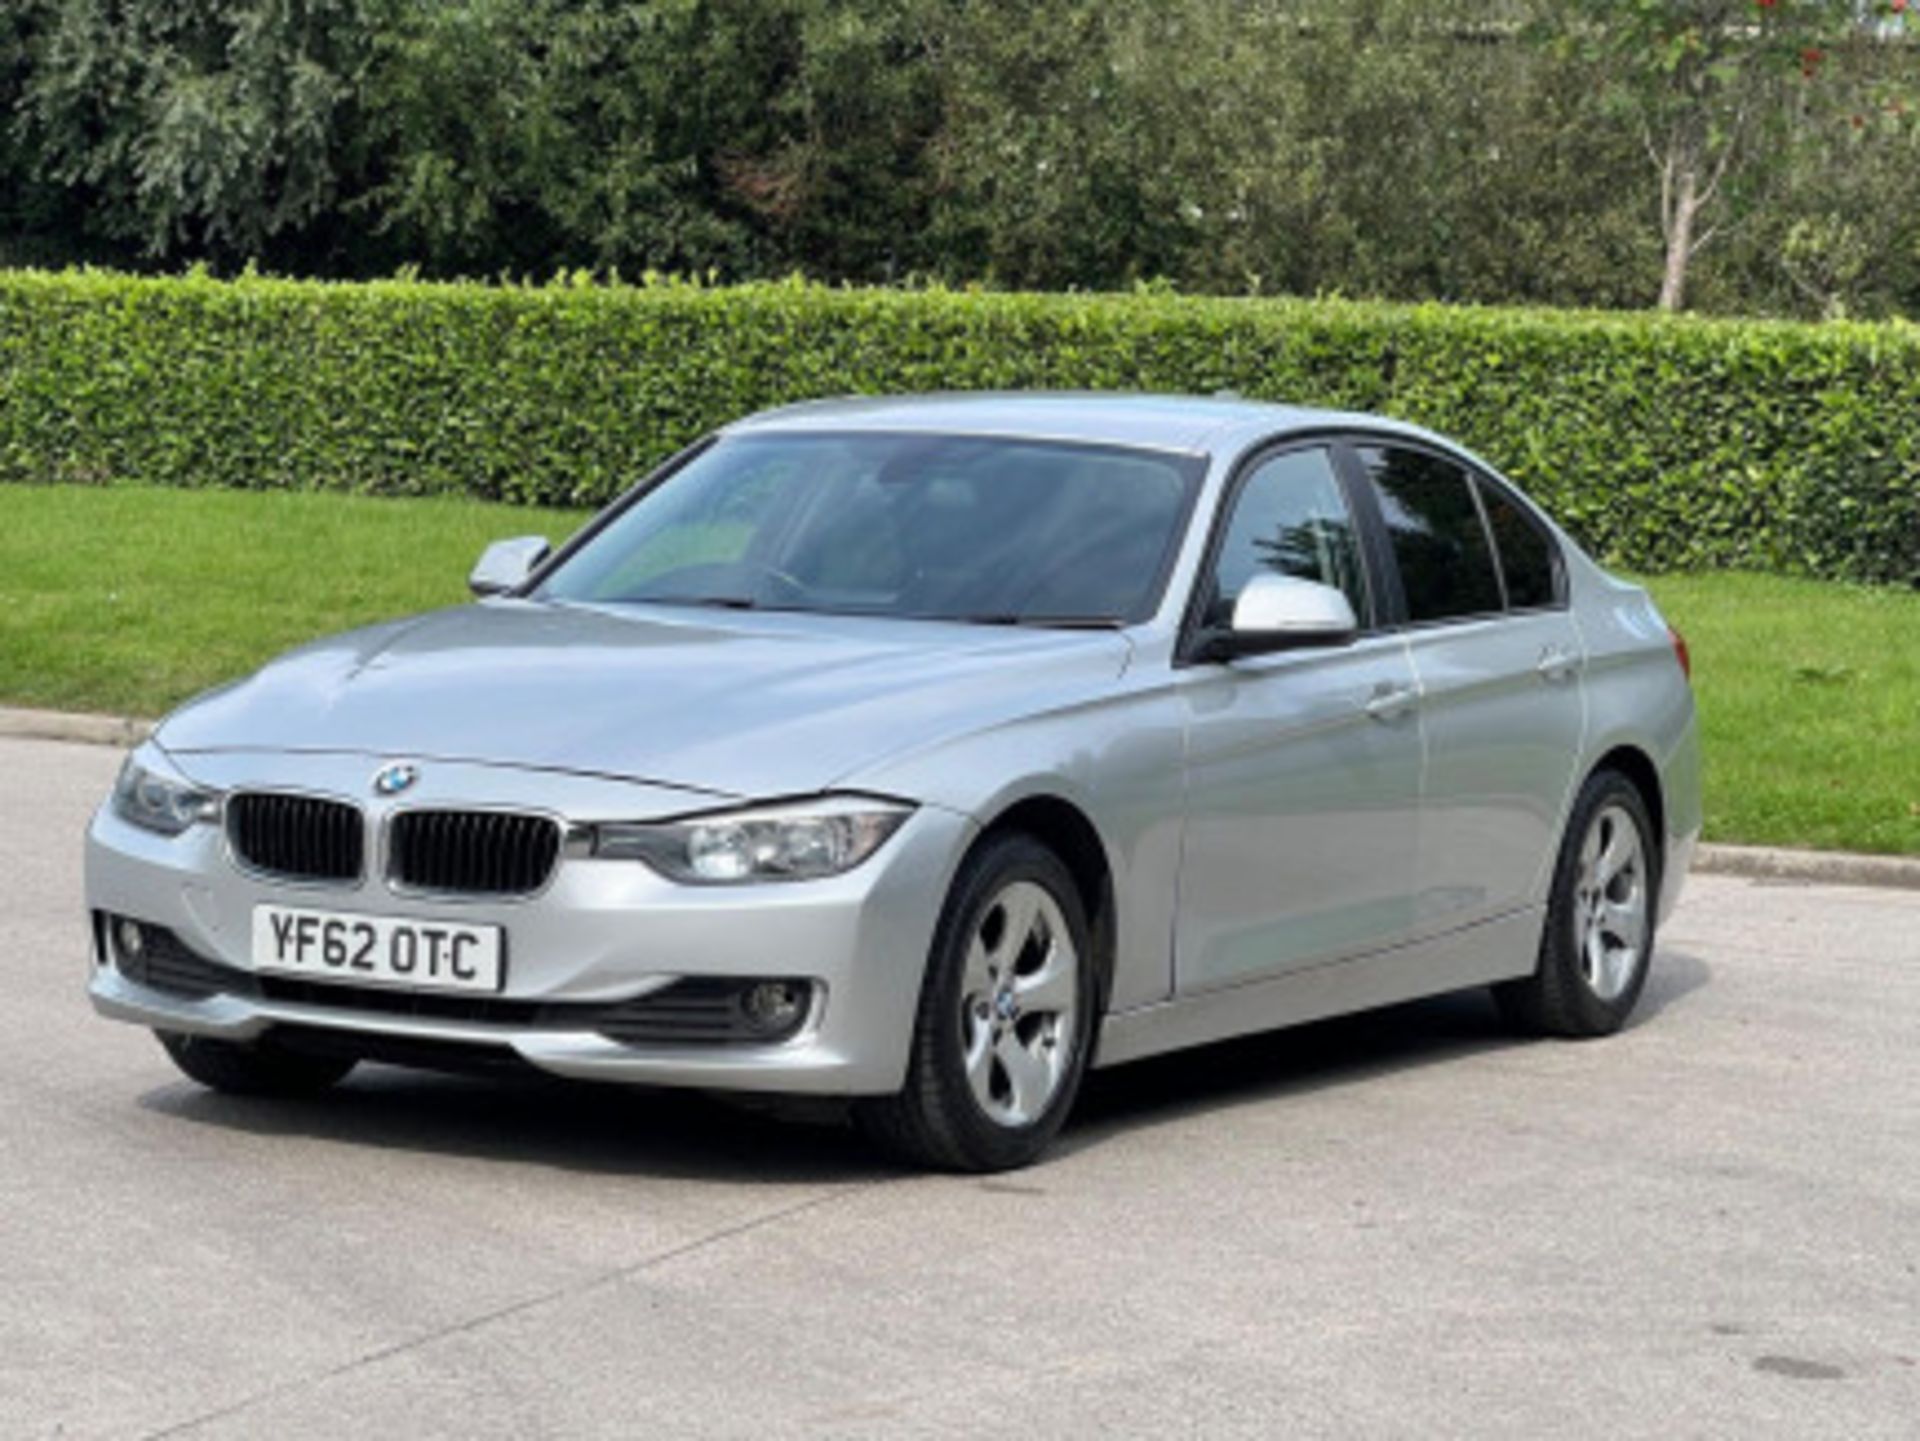 BMW 3 SERIES 2.0 DIESEL ED START STOP - A WELL-MAINTAINED GEM >>--NO VAT ON HAMMER--<< - Image 126 of 229